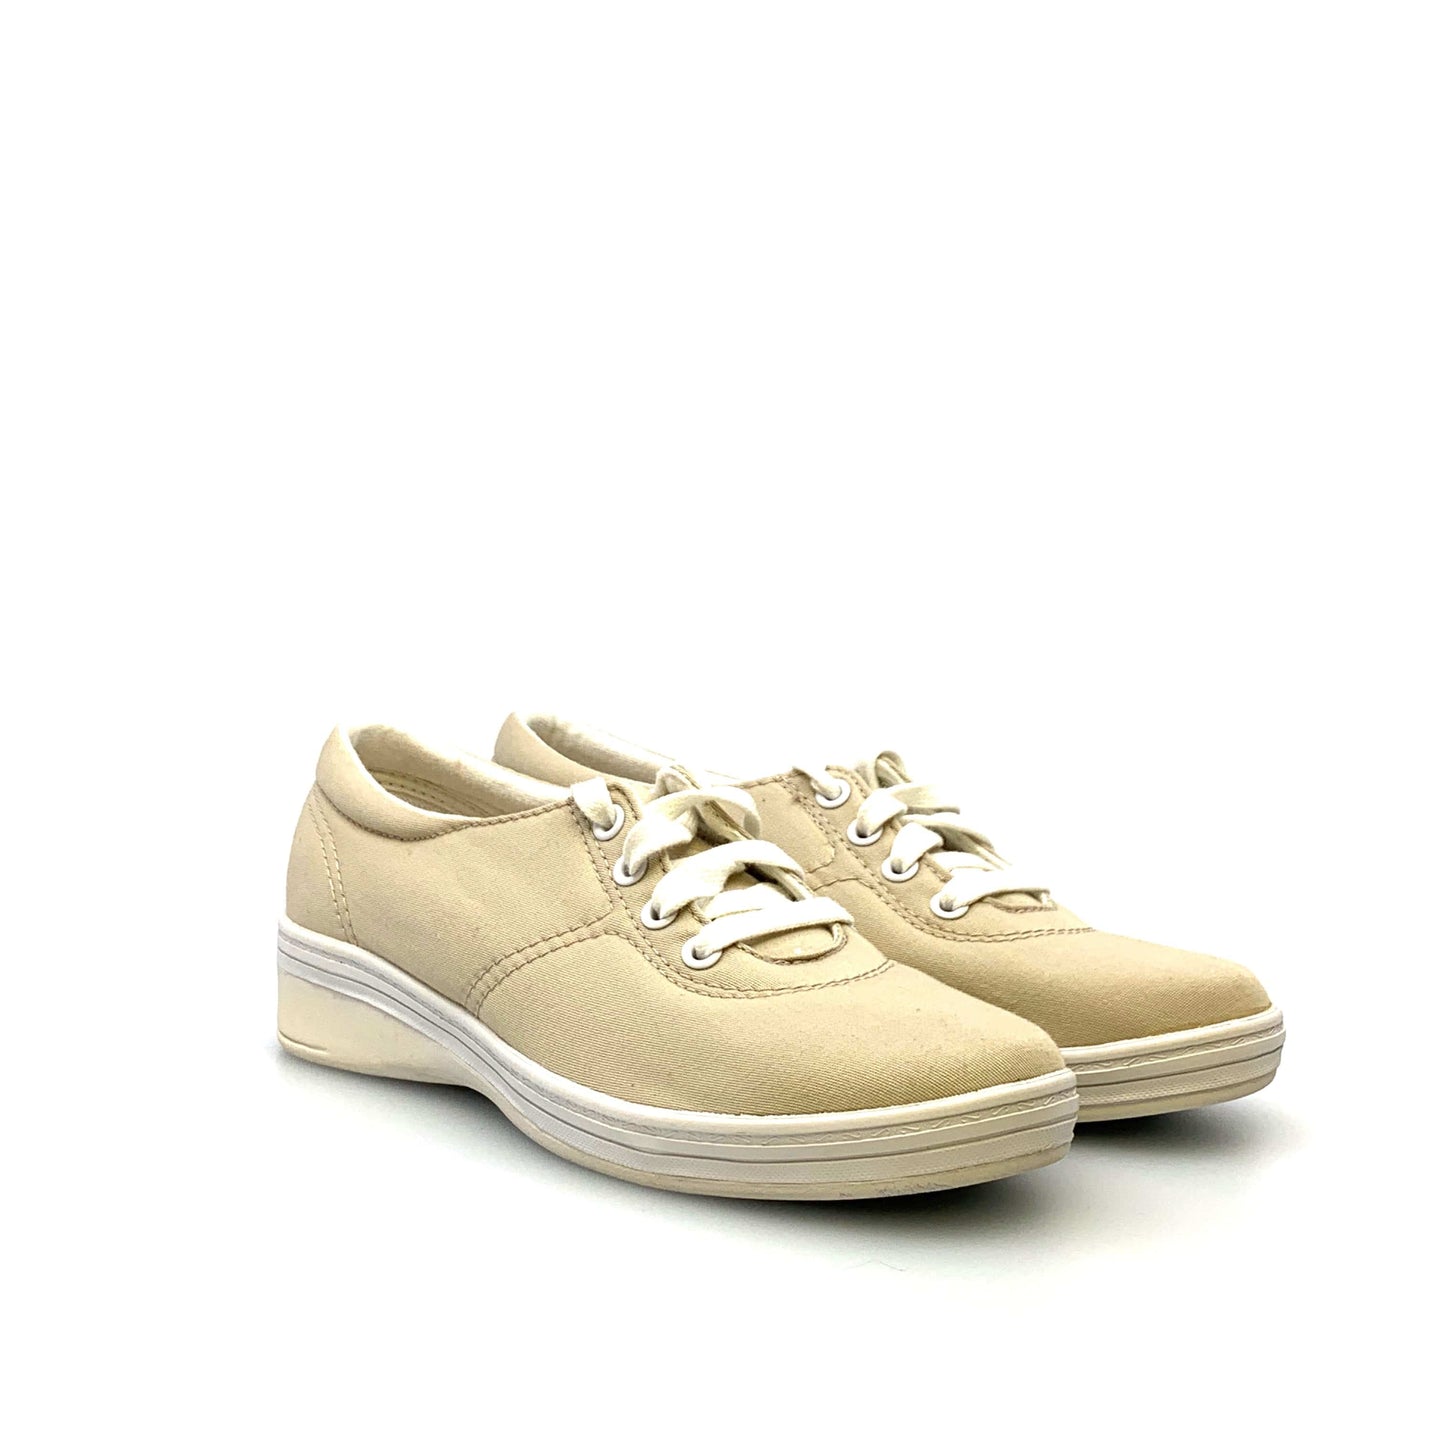 Keds Womens Shoes Size 6.5M Beige Canvas Lace Up Sneakers Athletic Shoes